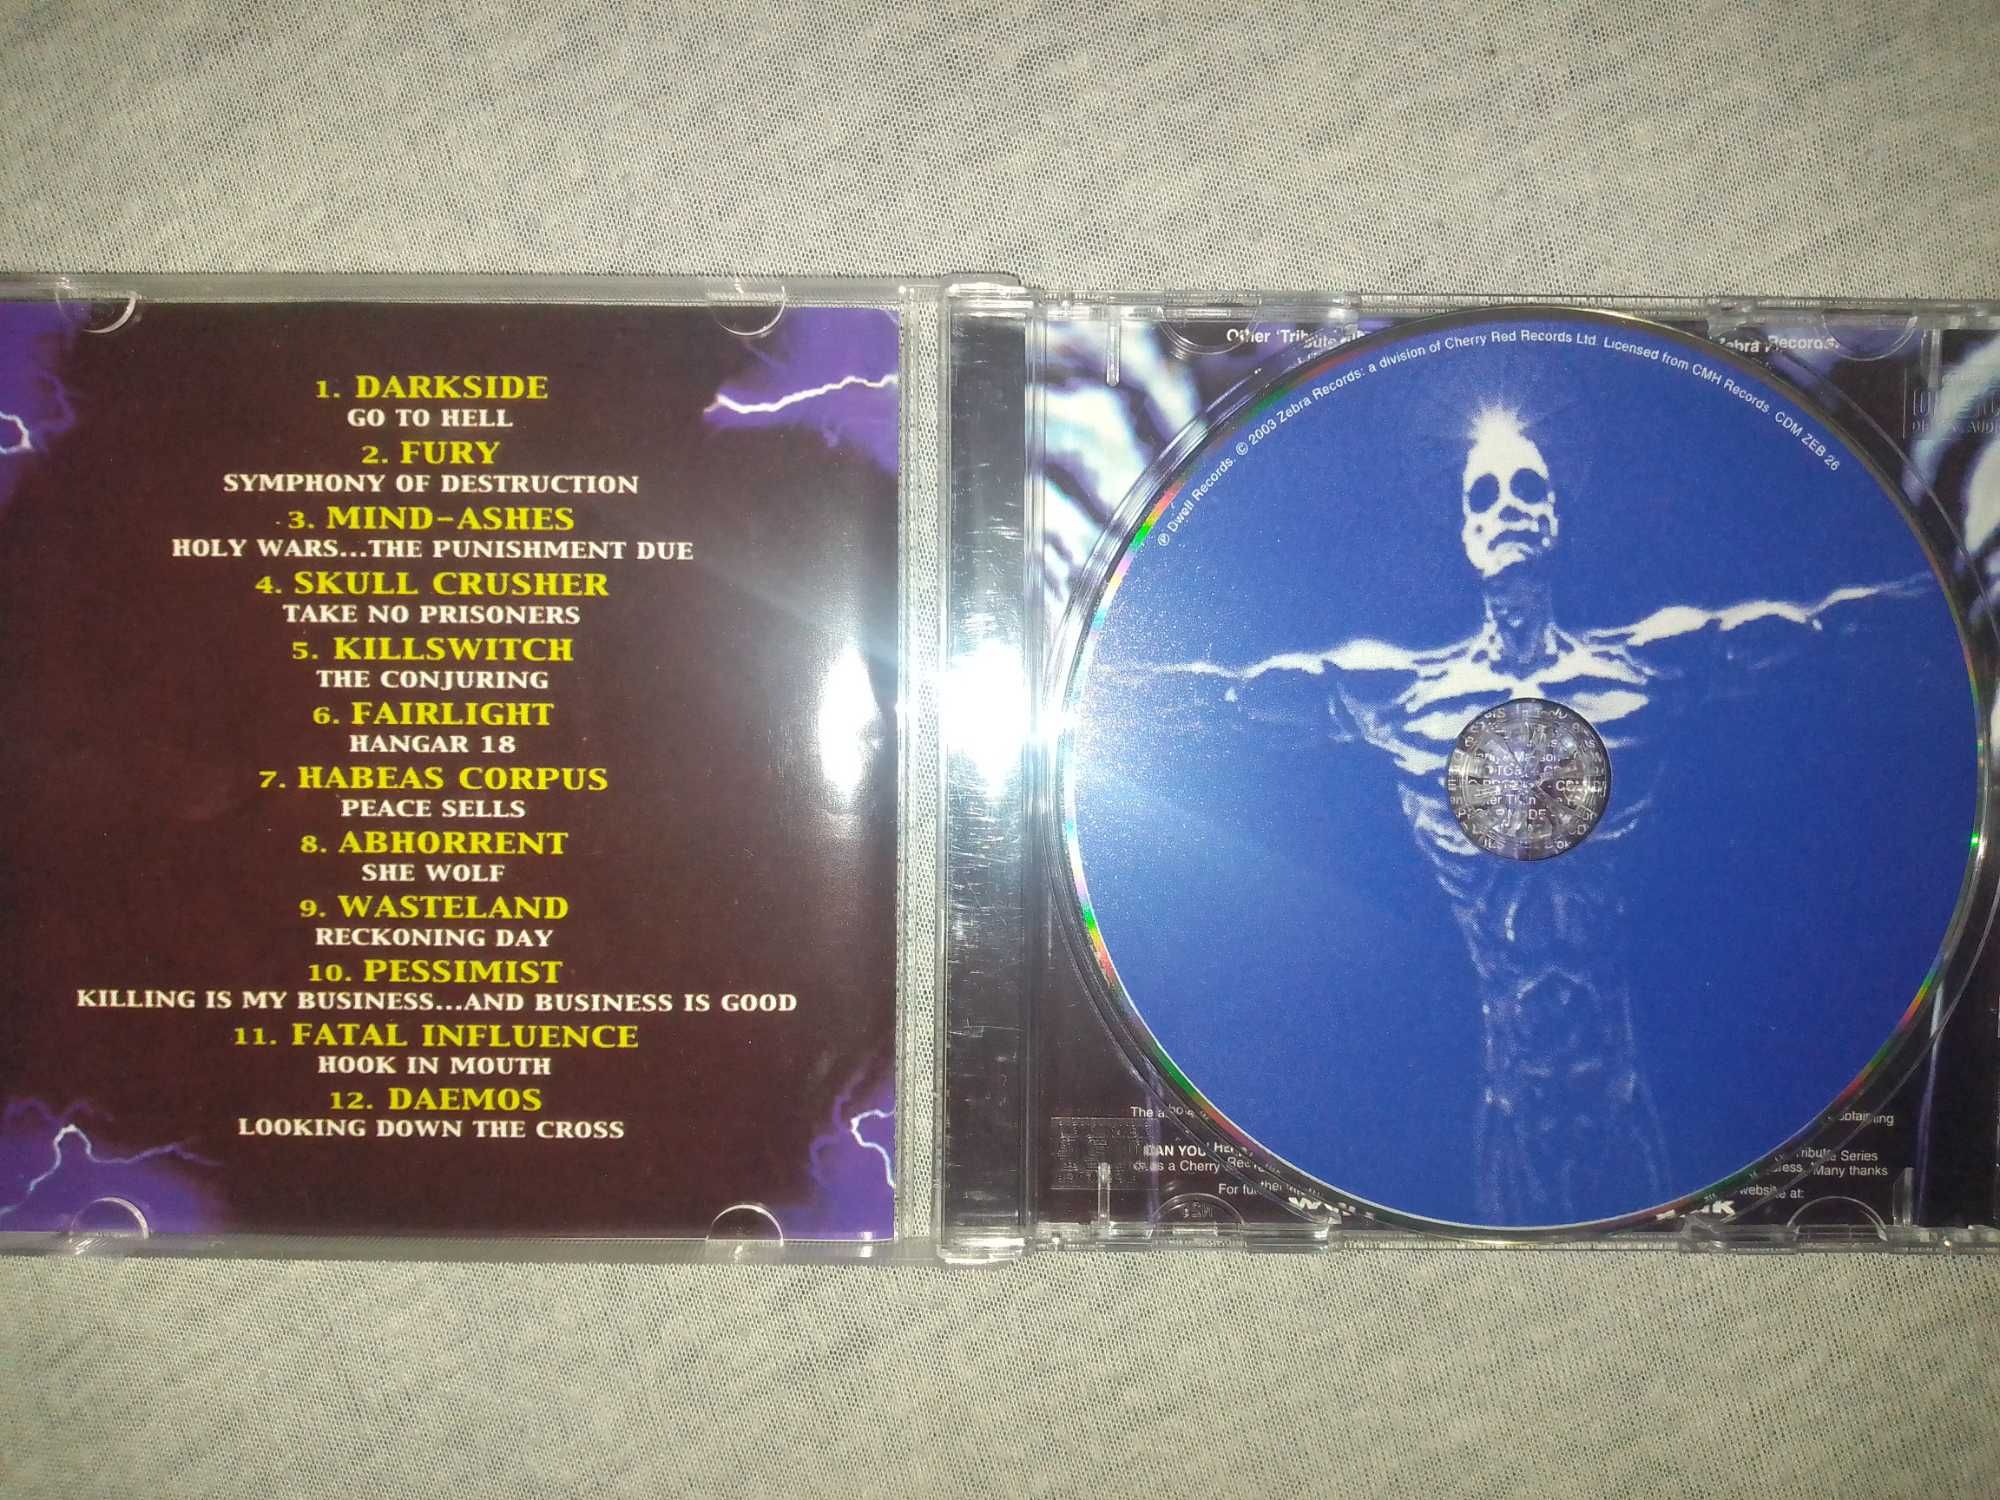 Megaded "A Tribute To Megadeth" фирменный CD Made In The UK.